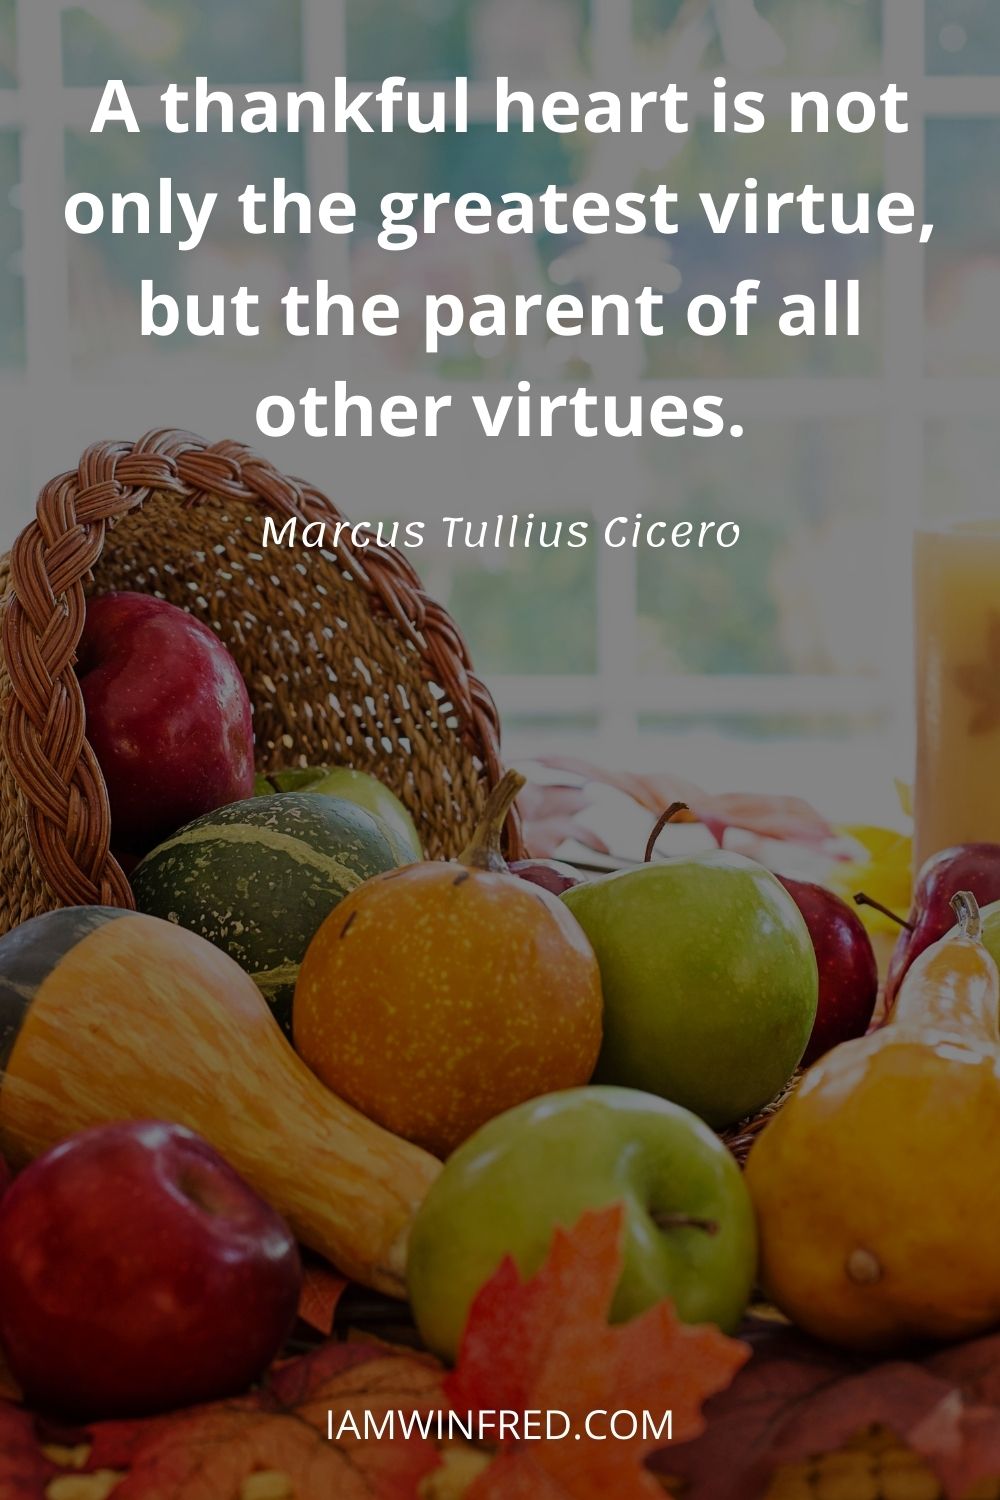 A Thankful Heart Is Not Only The Greatest Virtue But The Parent Of All Other Virtues.